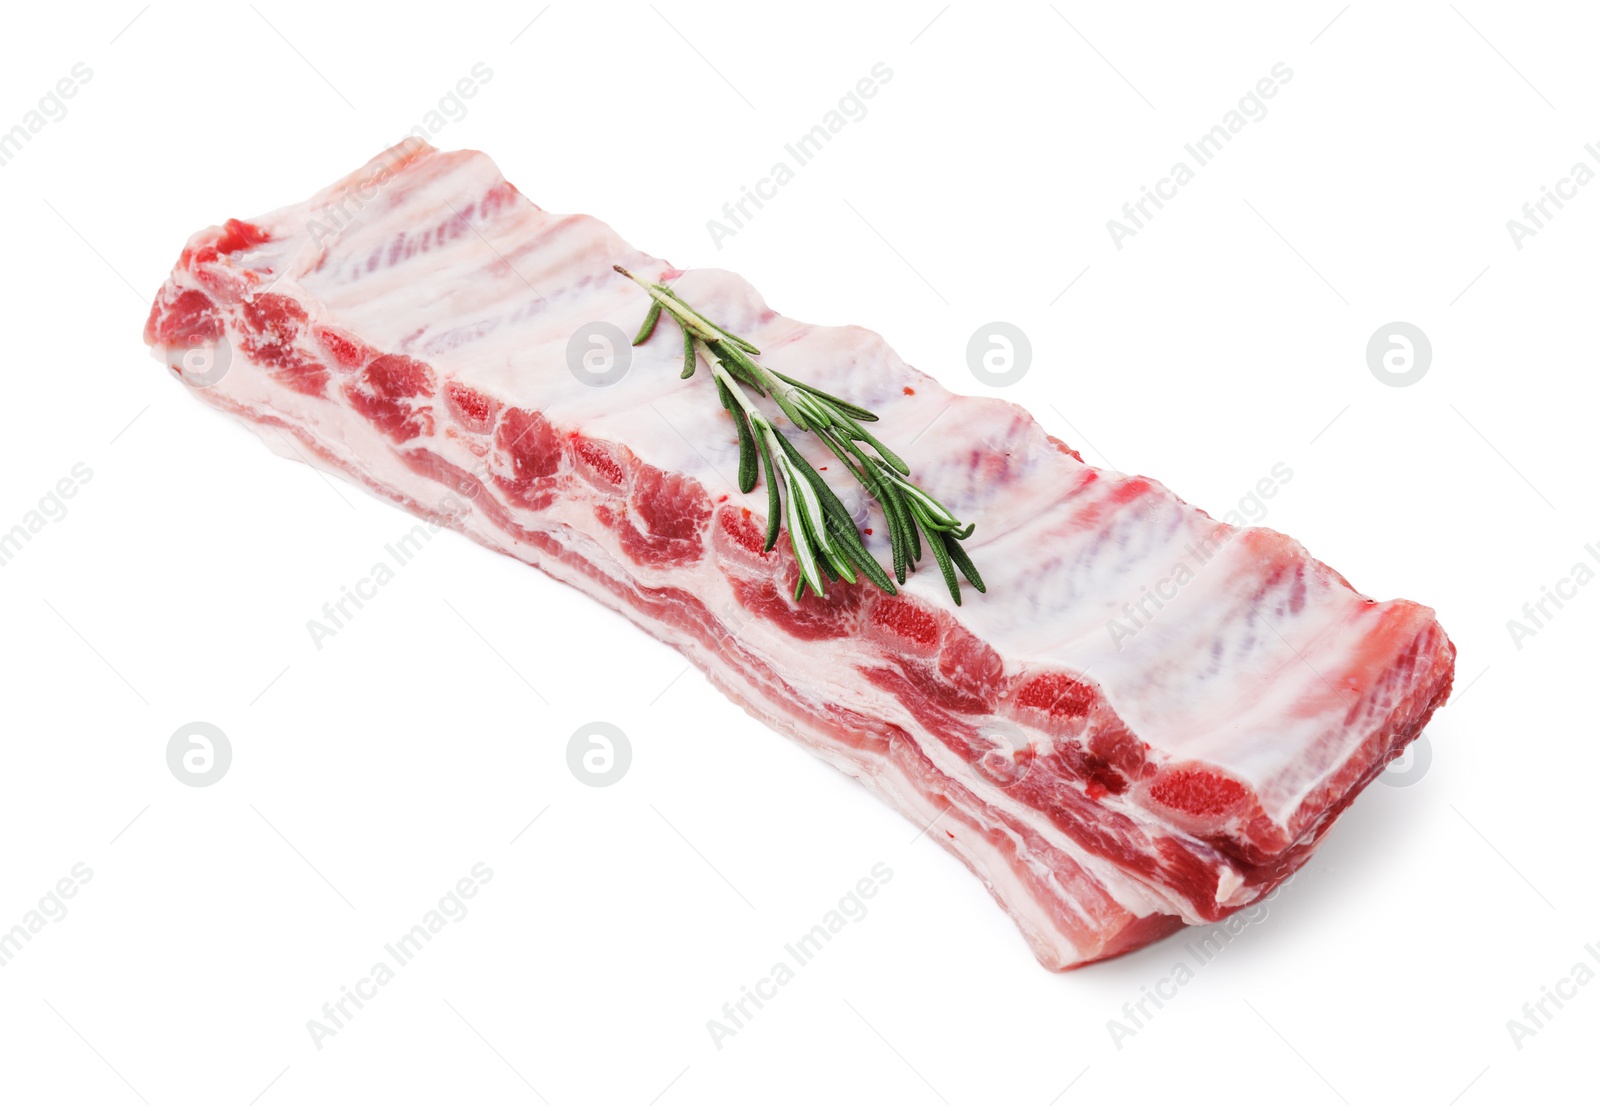 Photo of Raw pork ribs with rosemary isolated on white